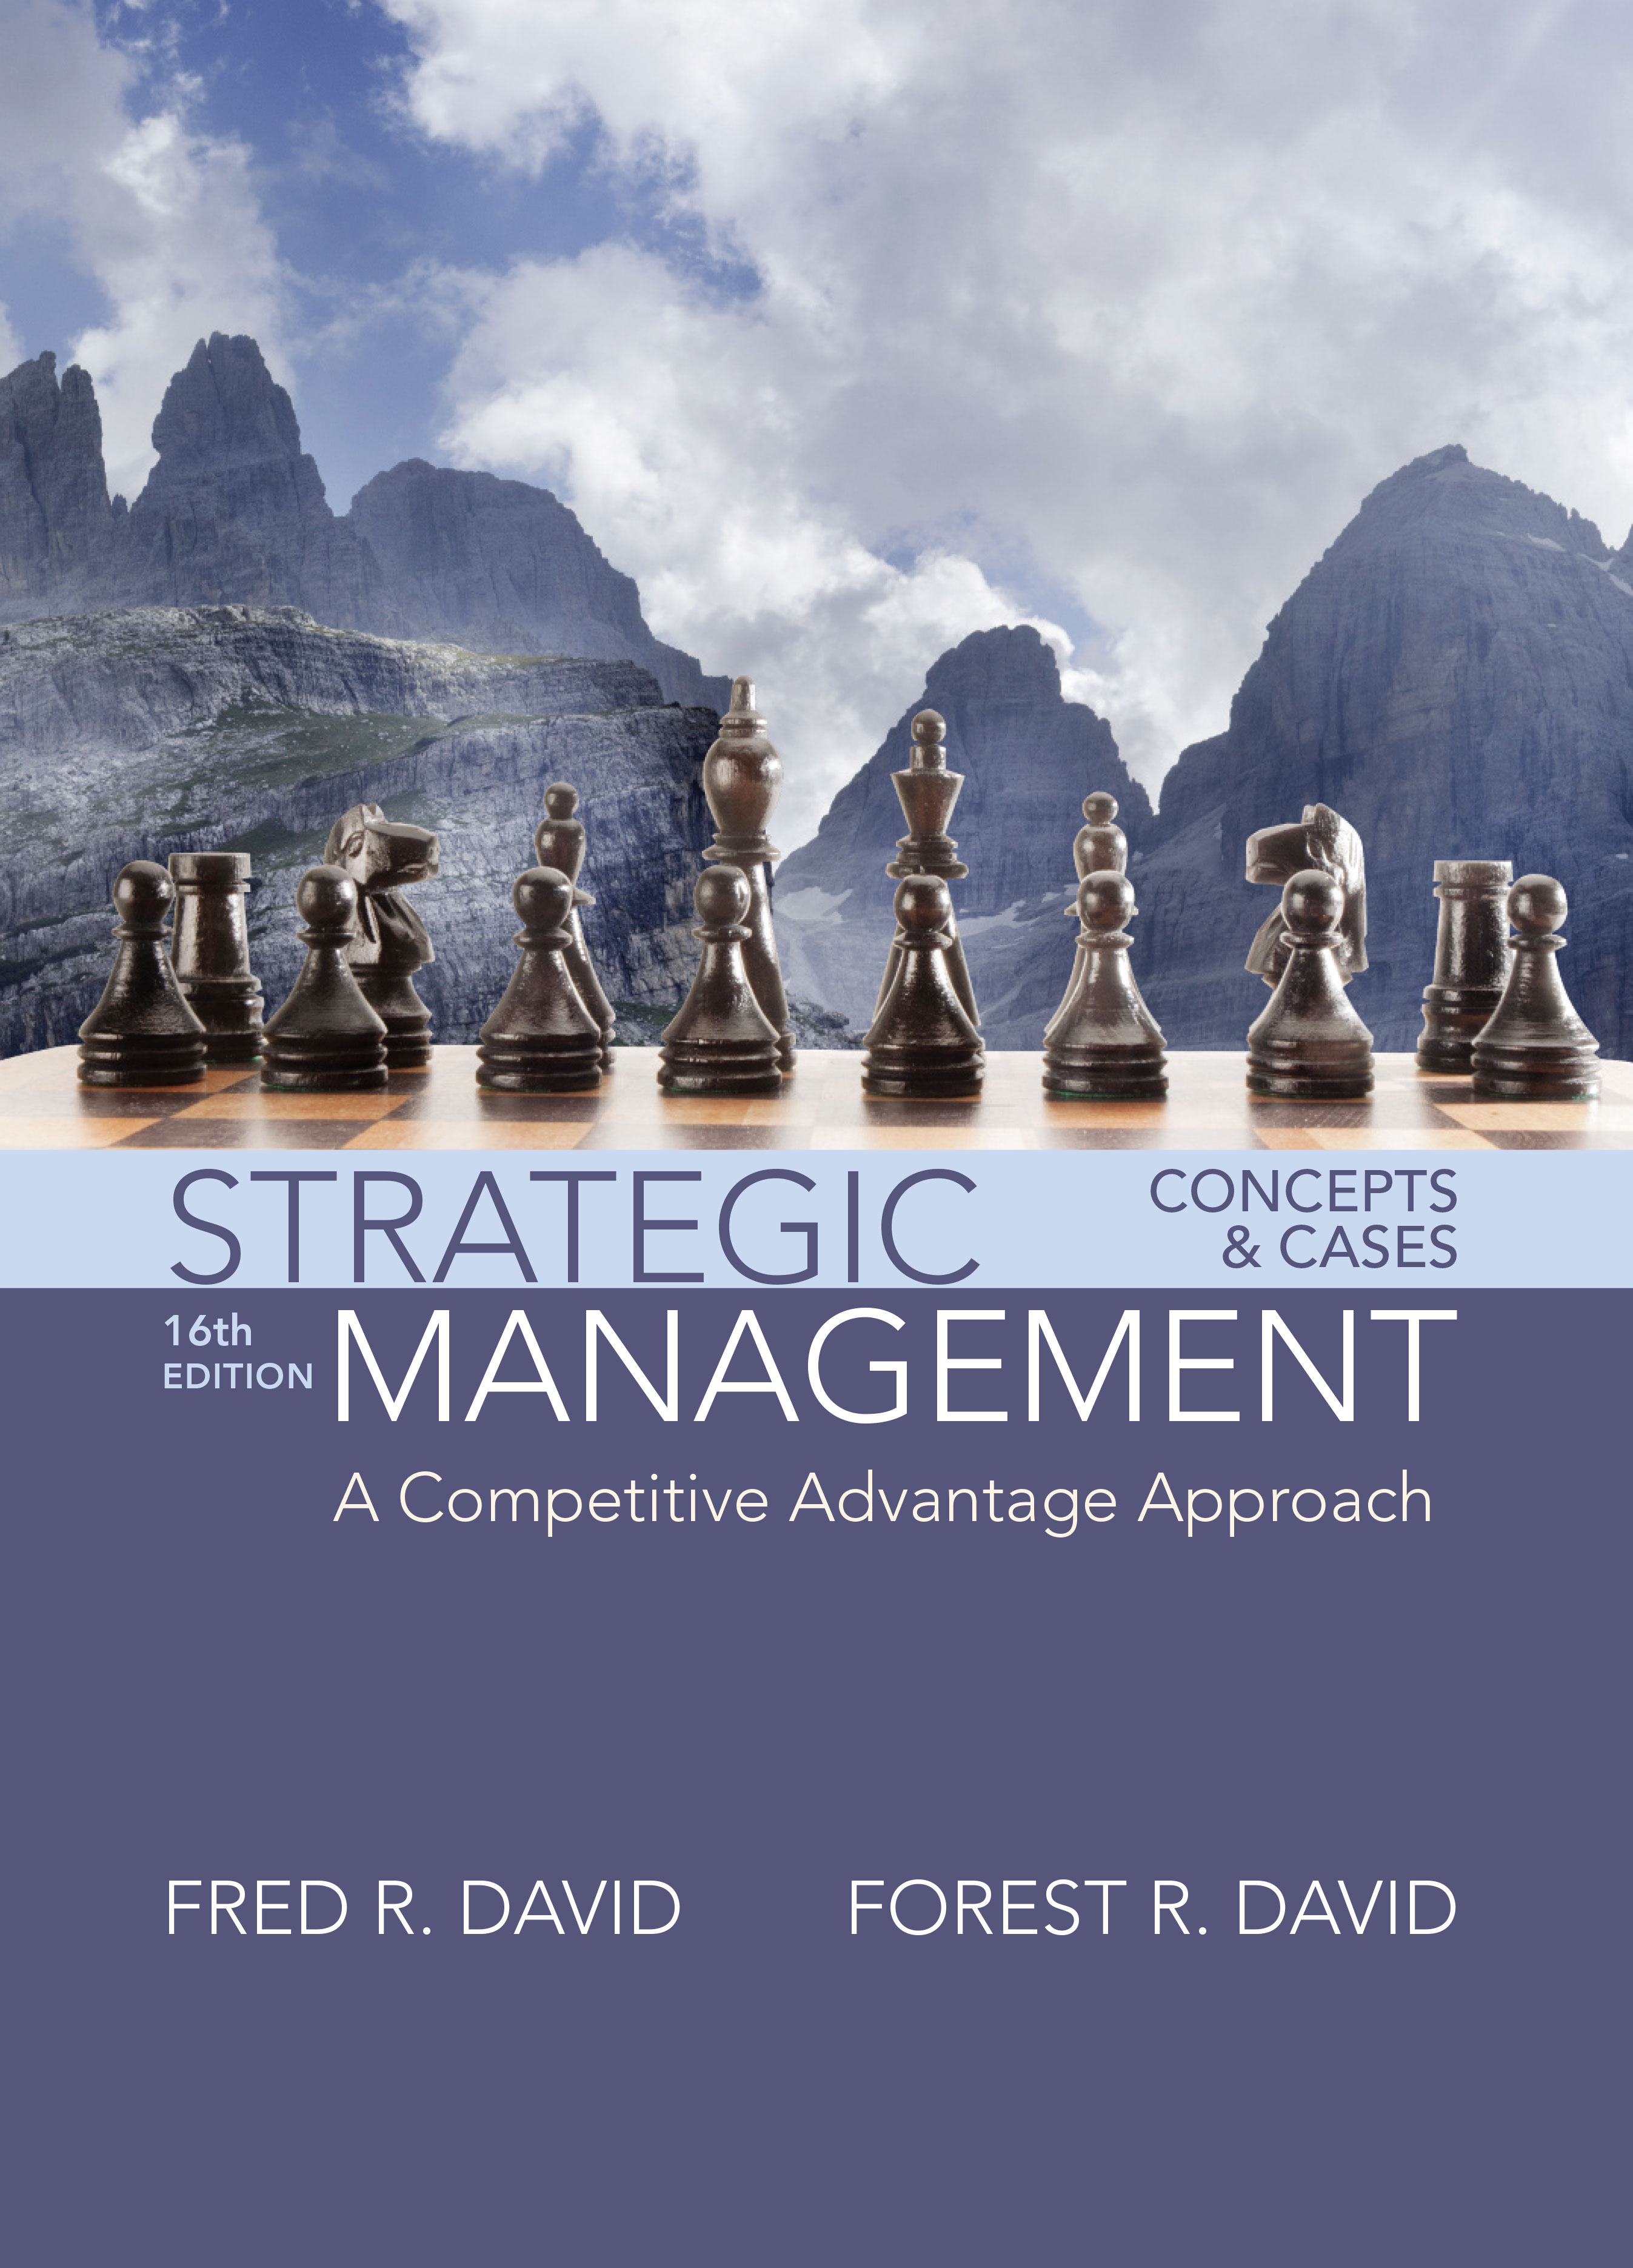 Book Cover, Strategic Management: A Competitive Advantage Approach, Concepts and Cases, 16/e by Fred R. David, Forest R. David, Pearson, 2017